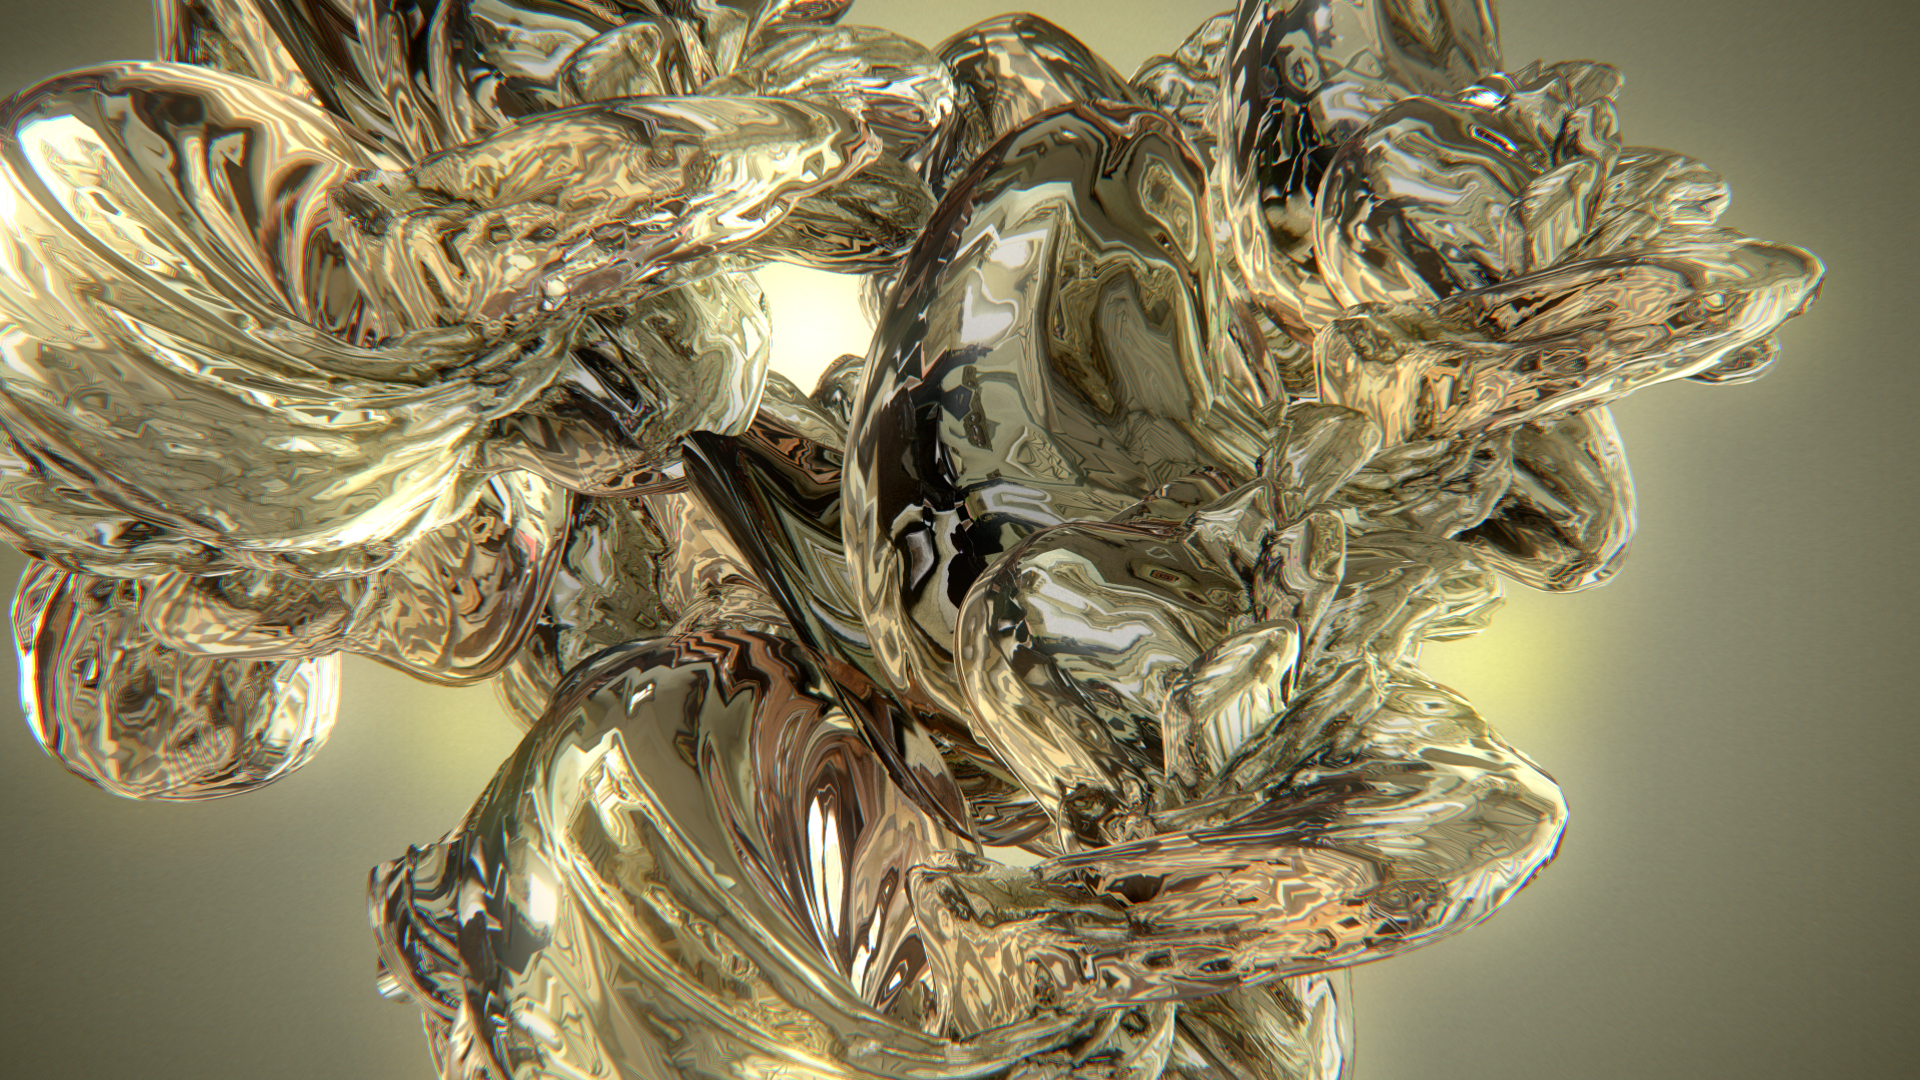 Trapcode Tao - Reflection Maps